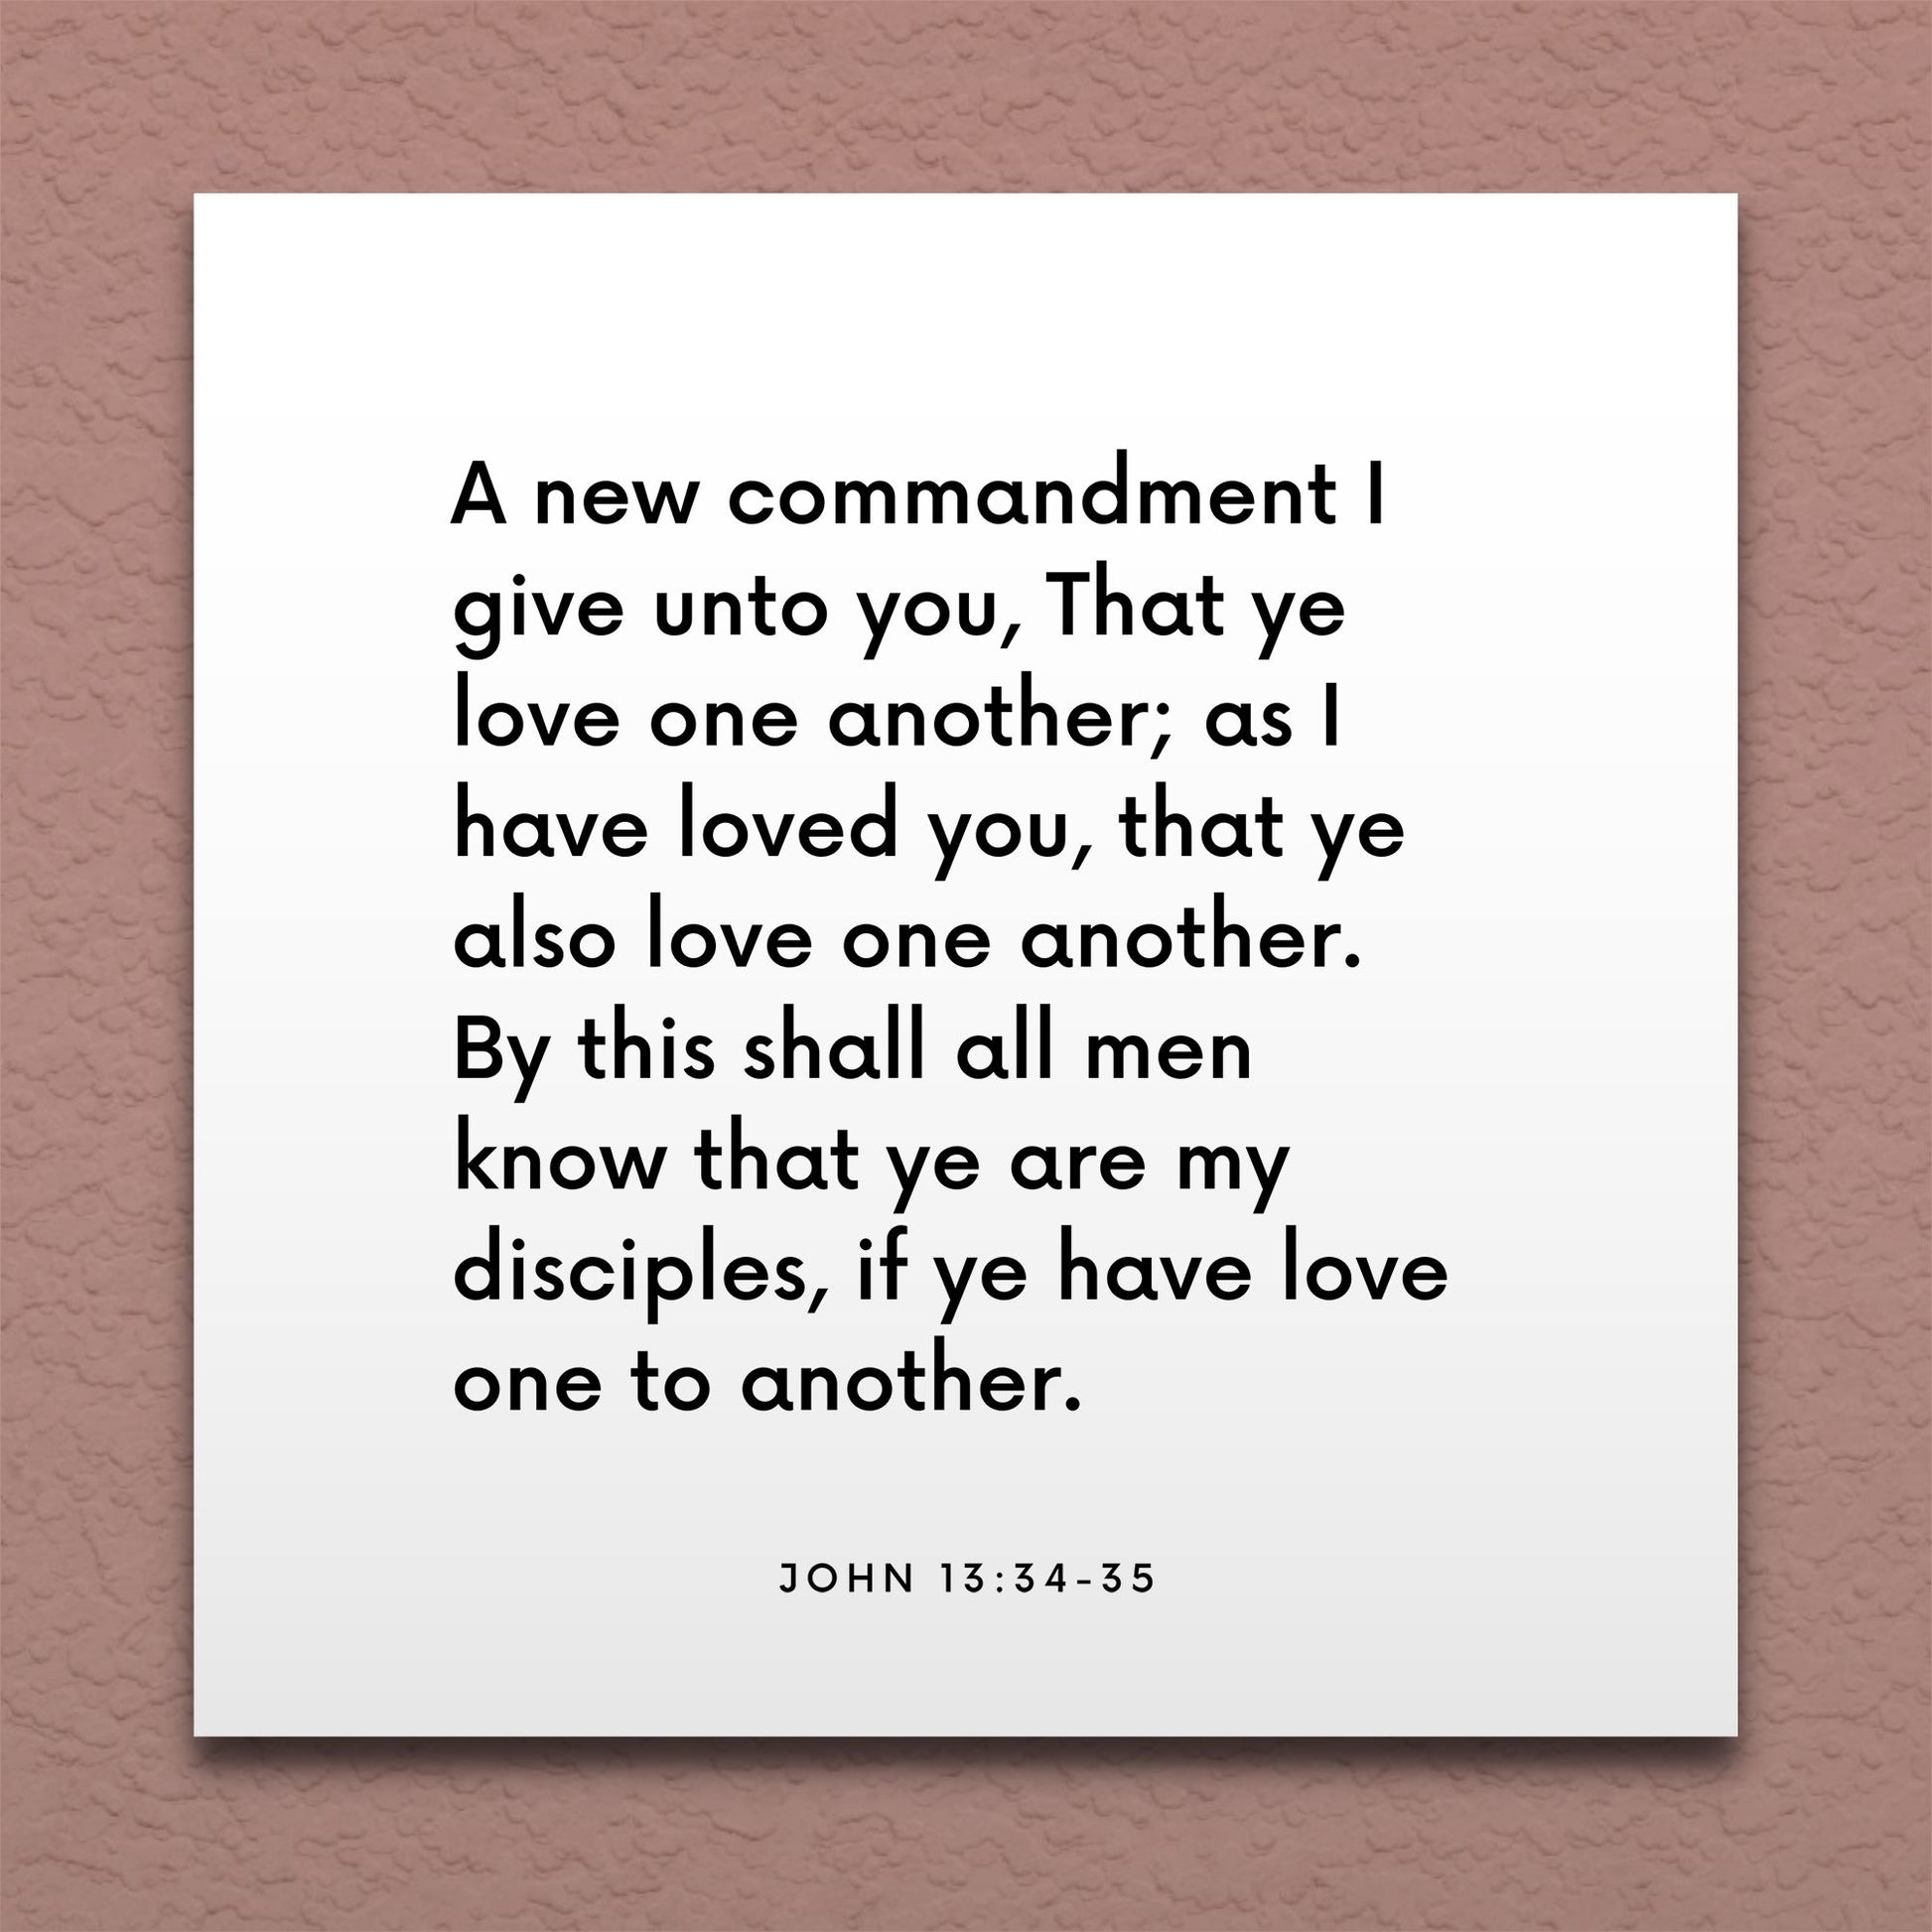 Wall-mounted scripture tile for John 13:34-35 - "A new commandment I give unto you, That ye love one another"